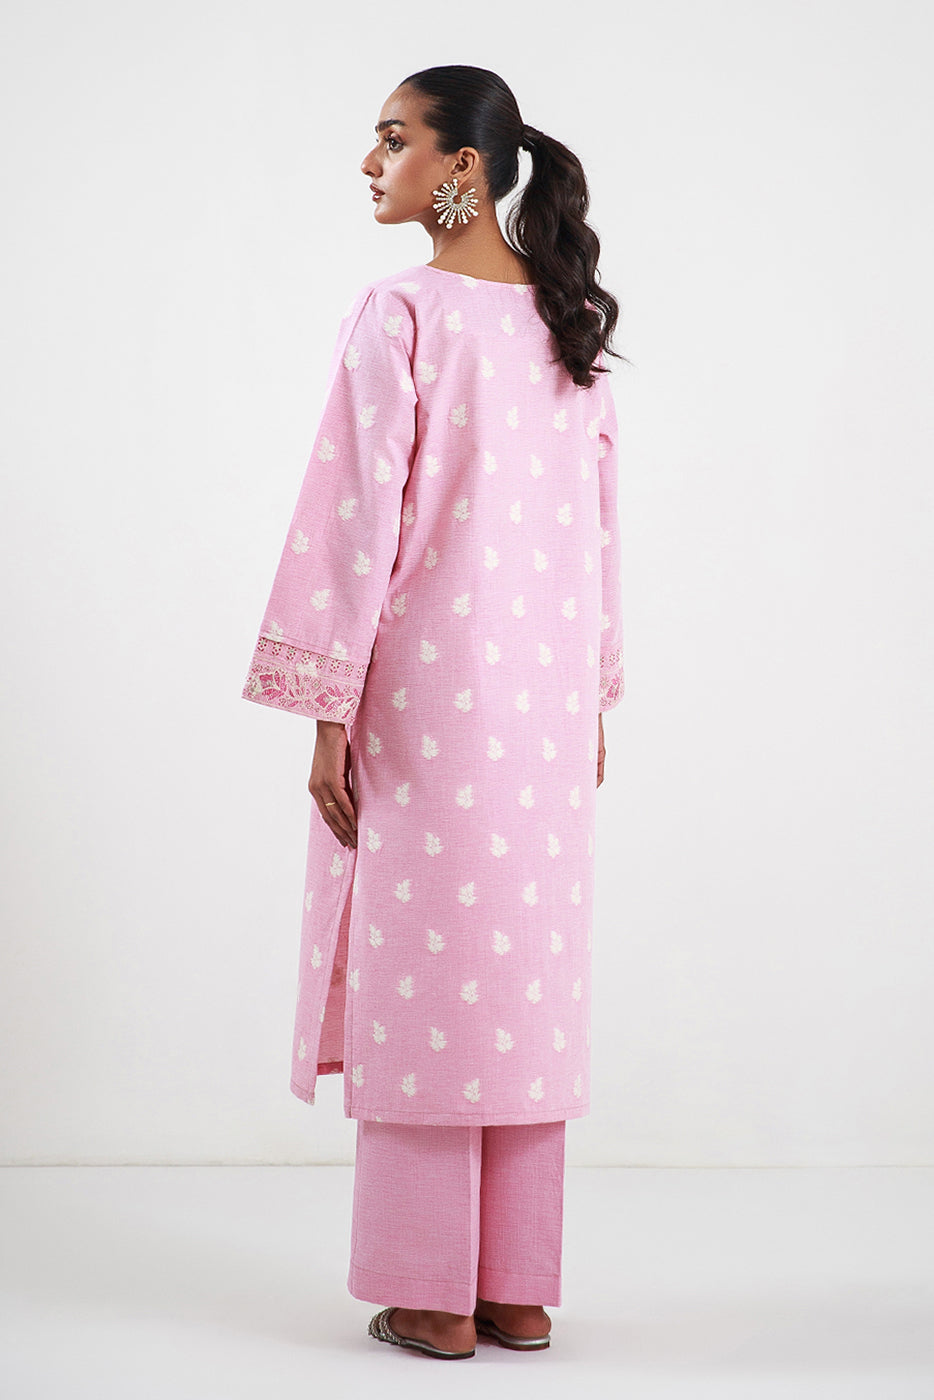 2 PIECE EMBROIDERED TWO TONE JACQUARD SUIT-ROSY PINK (UNSTITCHED)